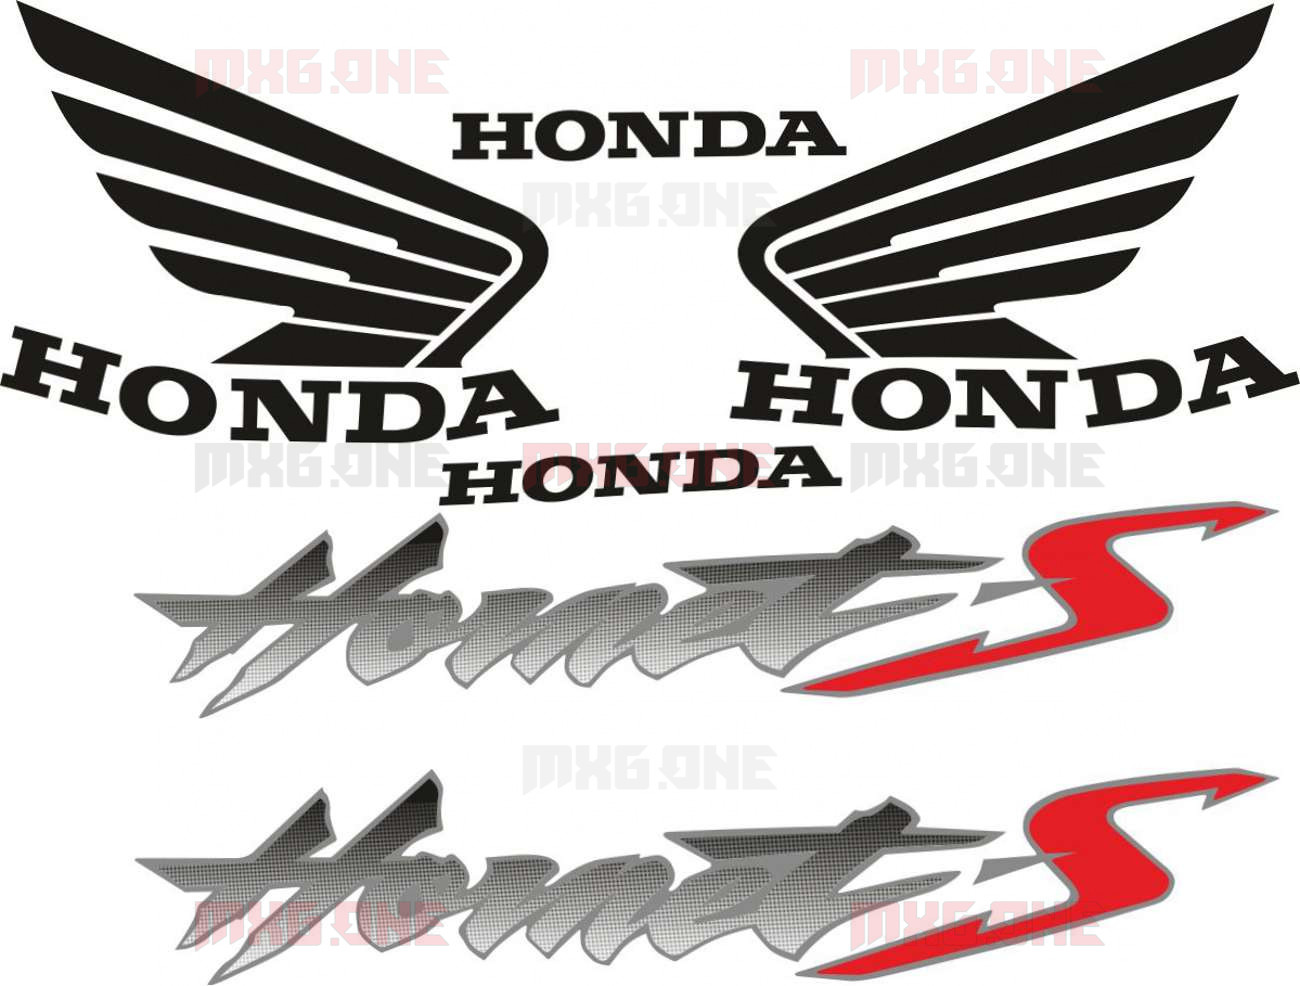 Honda Hornet Bees Stickers decals 150 microns thick toolbox helmet 115 x 105mm 